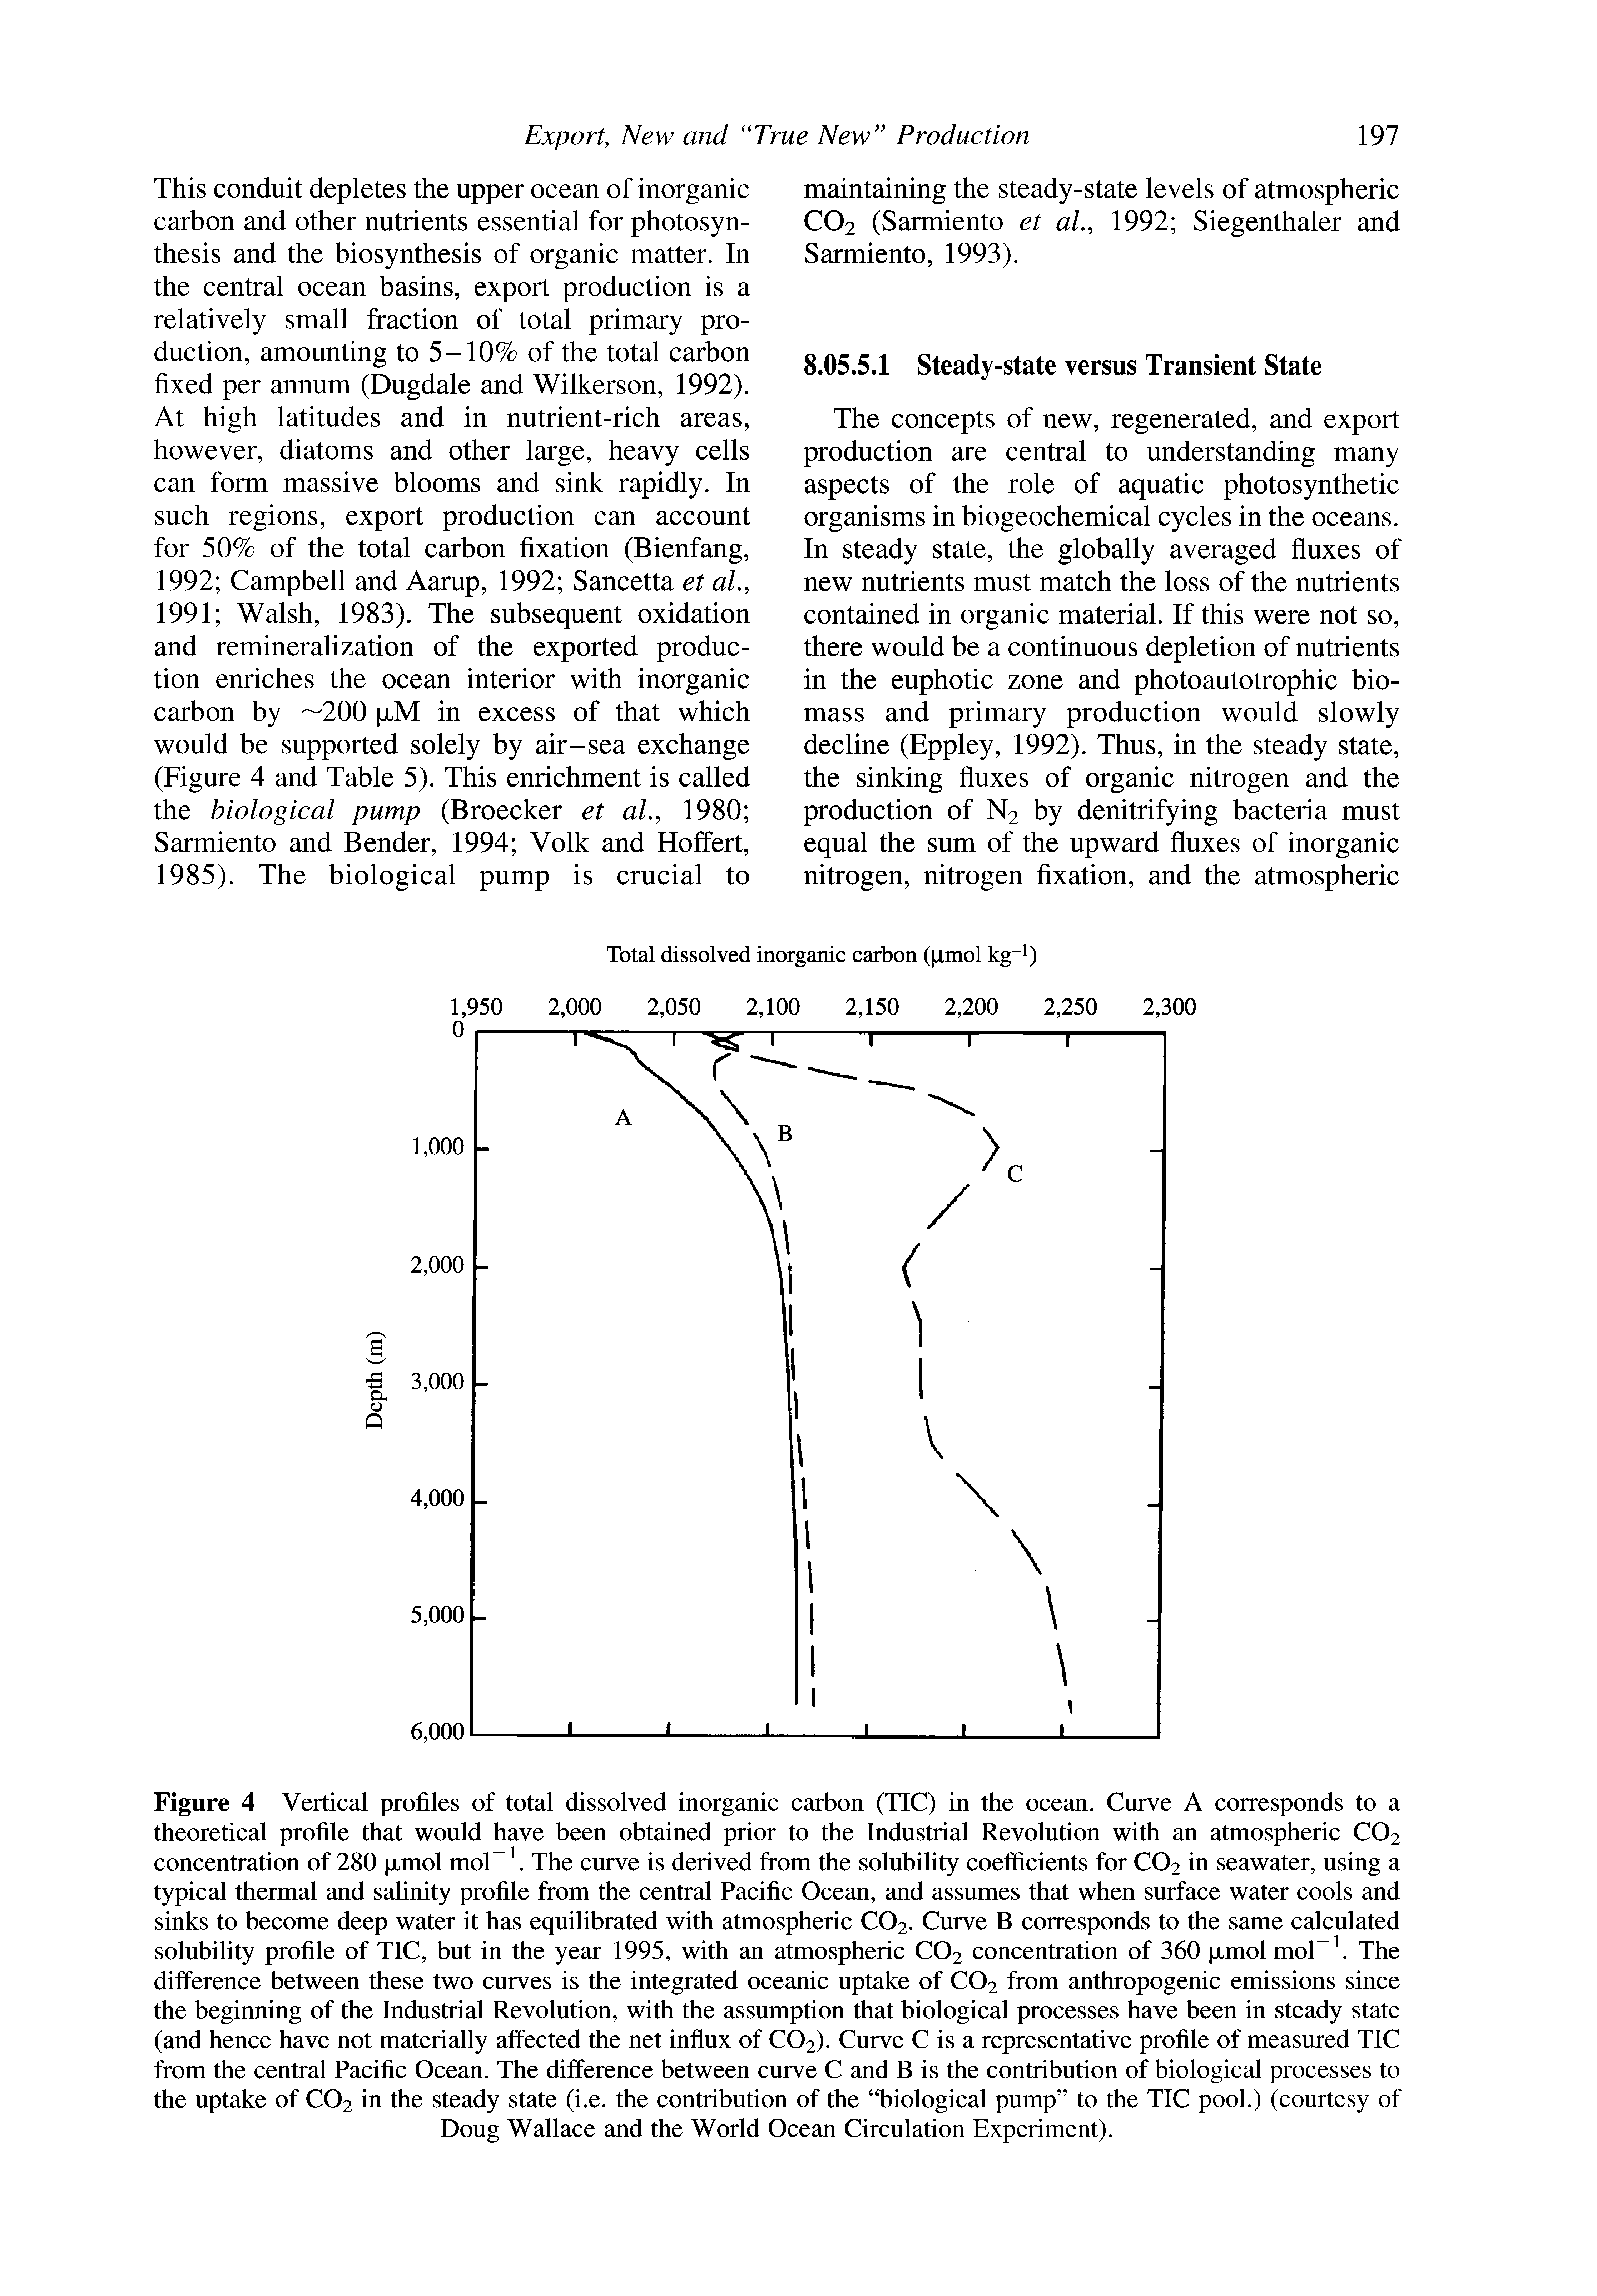 Figure 4 Vertical profiles of total dissolved inorganic carbon (TIC) in the ocean. Curve A corresponds to a theoretical profile that would have been obtained prior to the Industrial Revolution with an atmospheric CO2 concentration of 280 ixmol mol The curve is derived from the solubility coefficients for CO2 in seawater, using a typical thermal and salinity profile from the central Pacific Ocean, and assumes that when surface water cools and sinks to become deep water it has equilibrated with atmospheric CO2. Curve B corresponds to the same calculated solubility profile of TIC, but in the year 1995, with an atmospheric CO2 concentration of 360 xmol moPk The difference between these two curves is the integrated oceanic uptake of CO2 from anthropogenic emissions since the beginning of the Industrial Revolution, with the assumption that biological processes have been in steady state (and hence have not materially affected the net influx of CO2). Curve C is a representative profile of measured TIC from the central Pacific Ocean. The difference between curve C and B is the contribution of biological processes to the uptake of CO2 in the steady state (i.e. the contribution of the biological pump to the TIC pool.) (courtesy of Doug Wallace and the World Ocean Circulation Experiment).